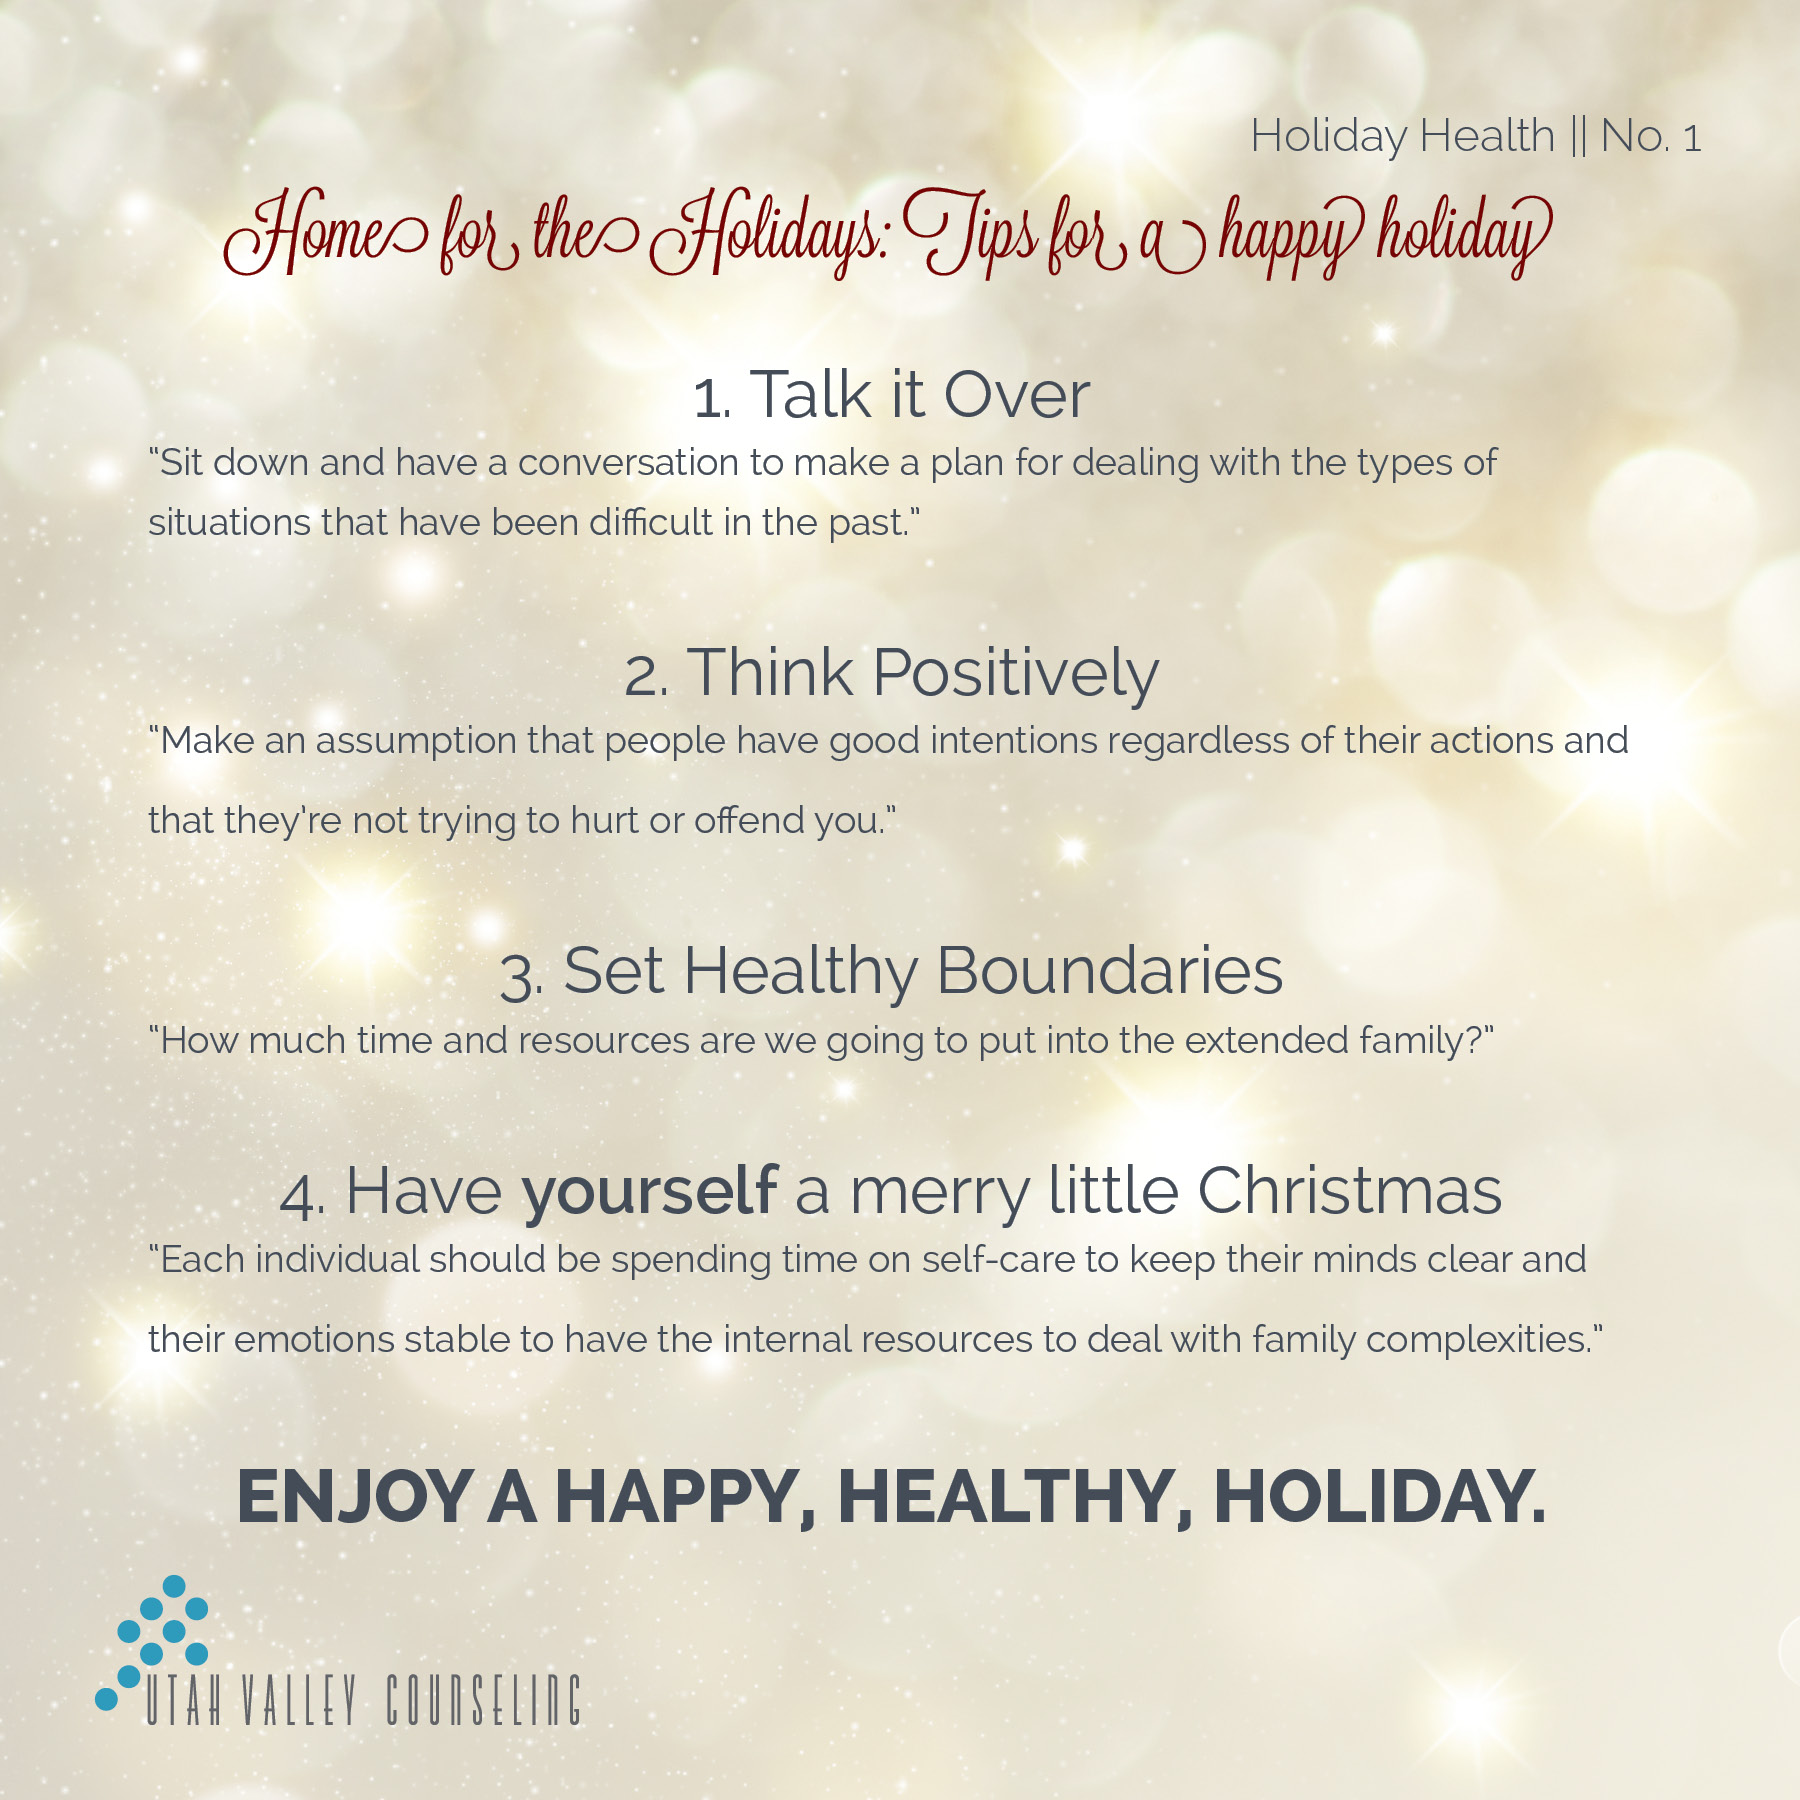 Holiday Tips for Family Events - Happy Holidays with Family